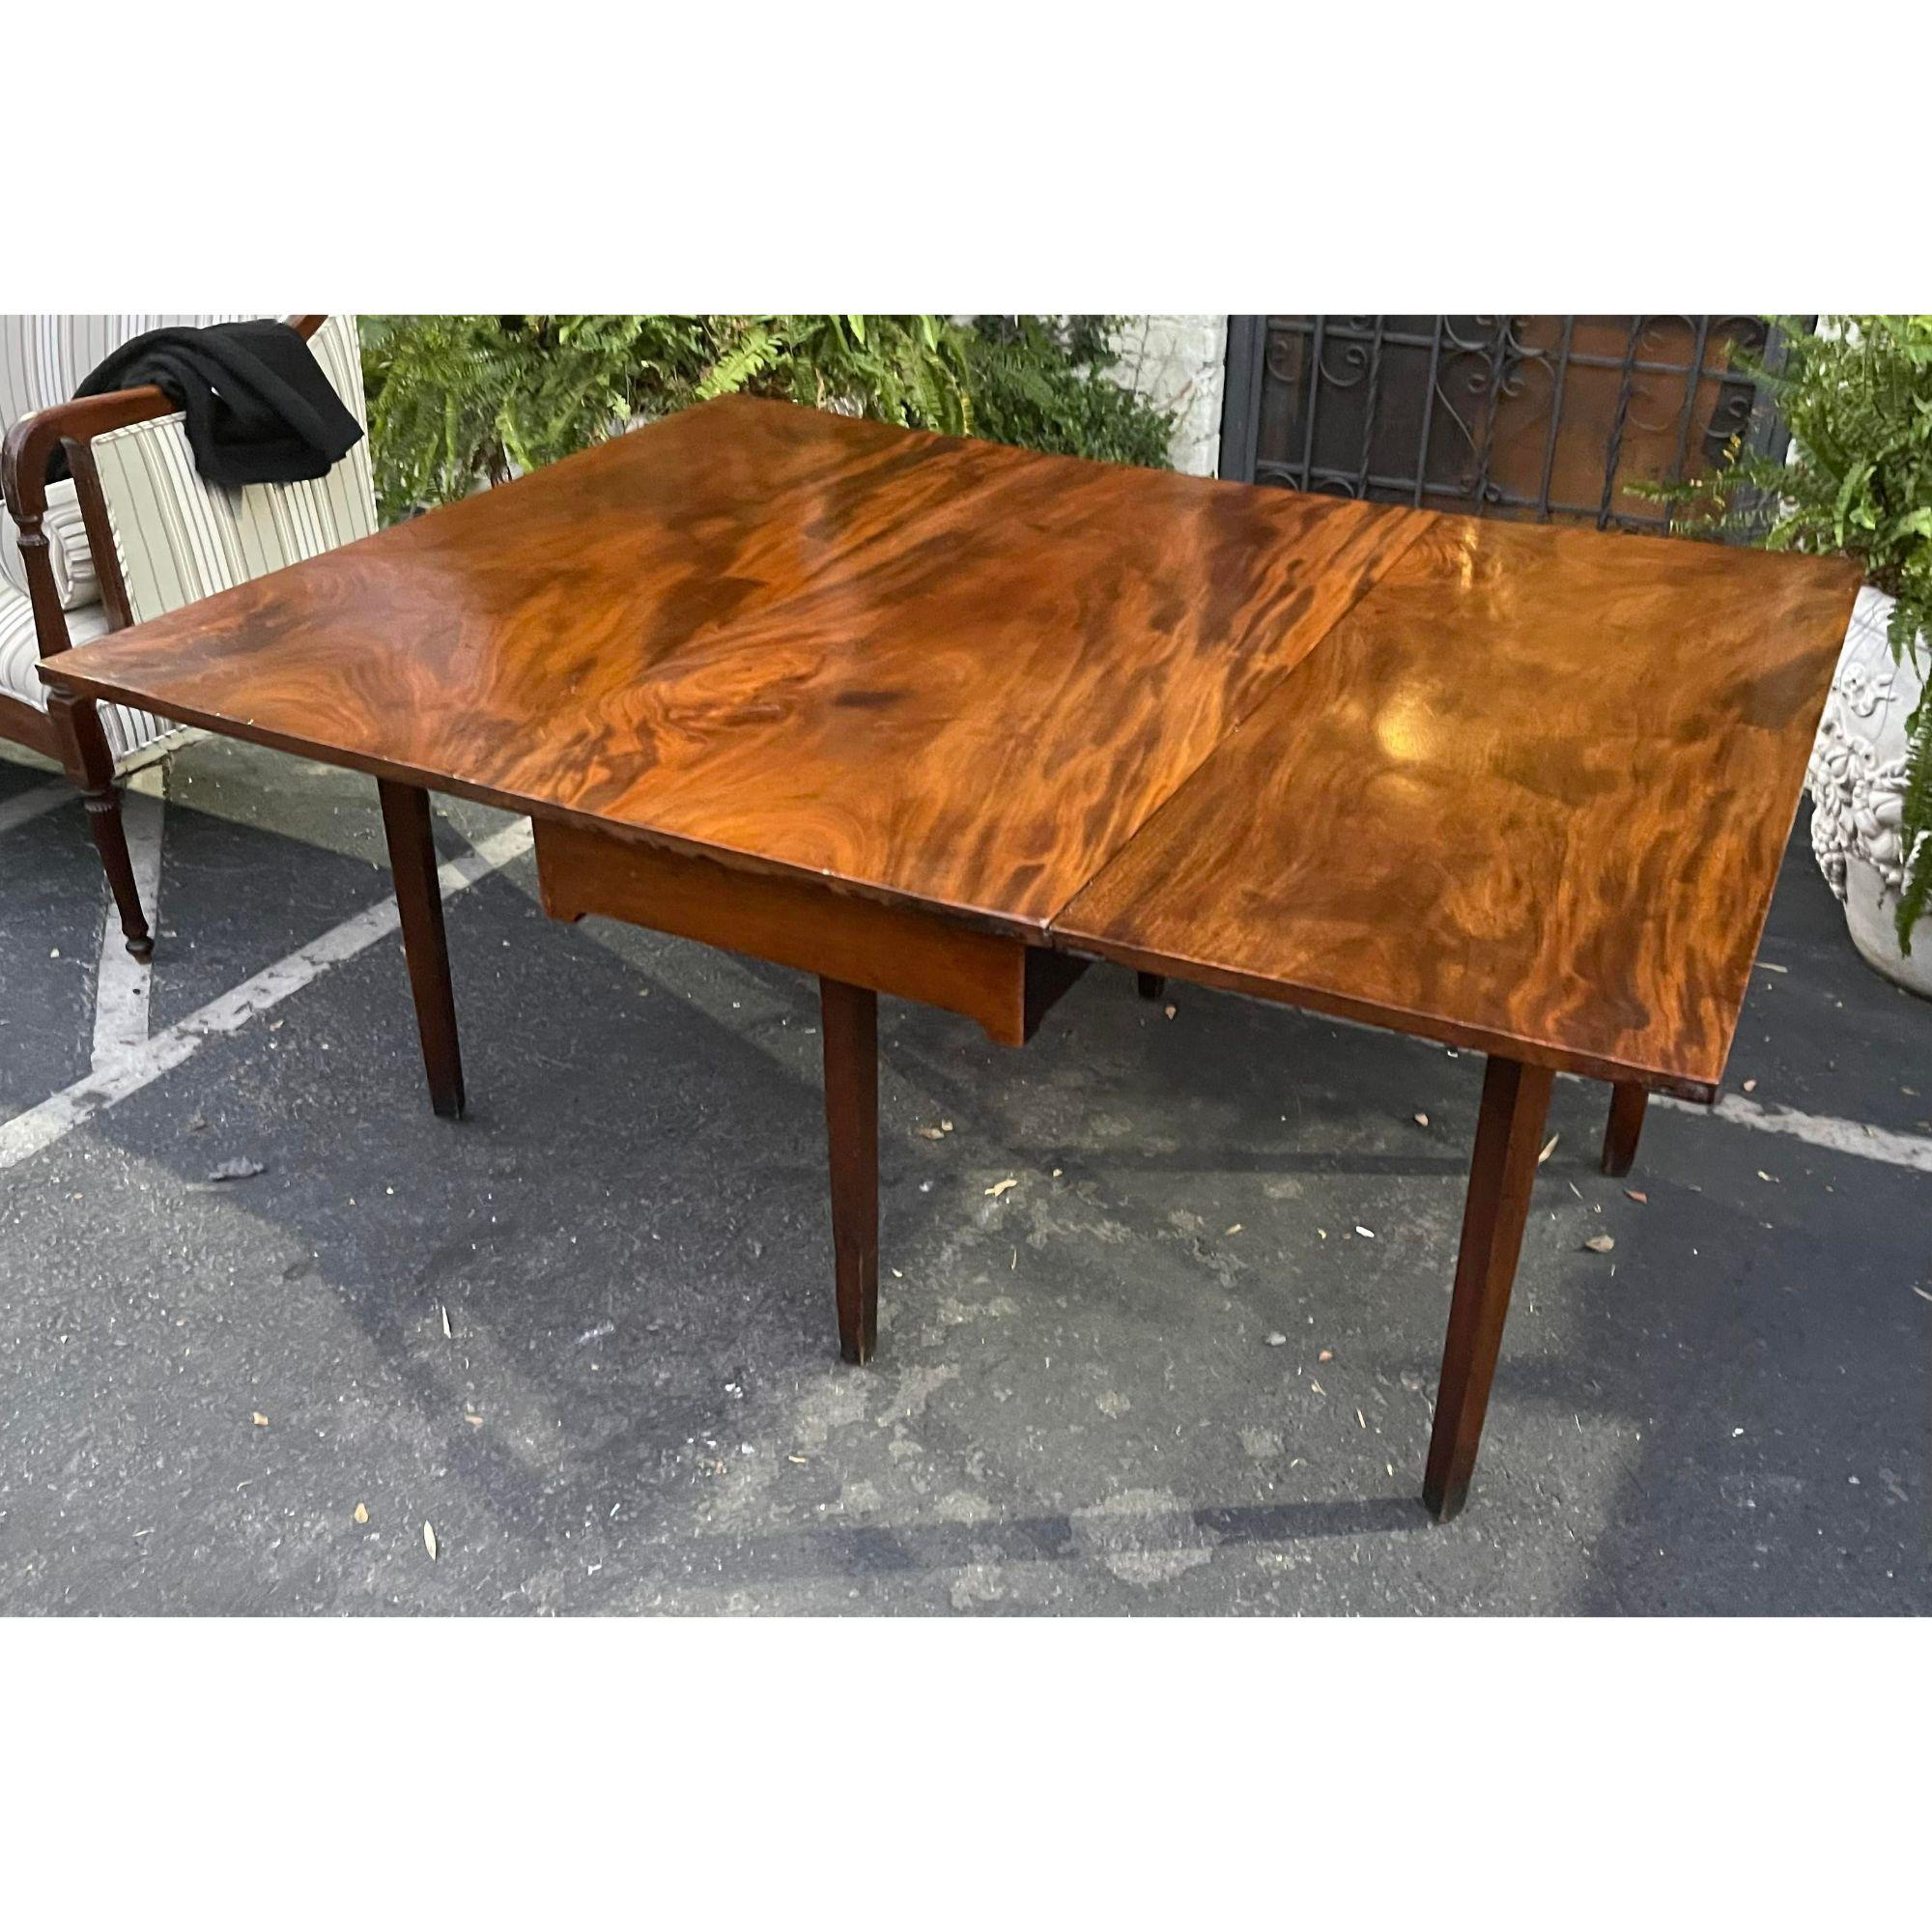 Antique English Honduran Mahogany Drop Lead Dining Table, Early 18th Century For Sale 2